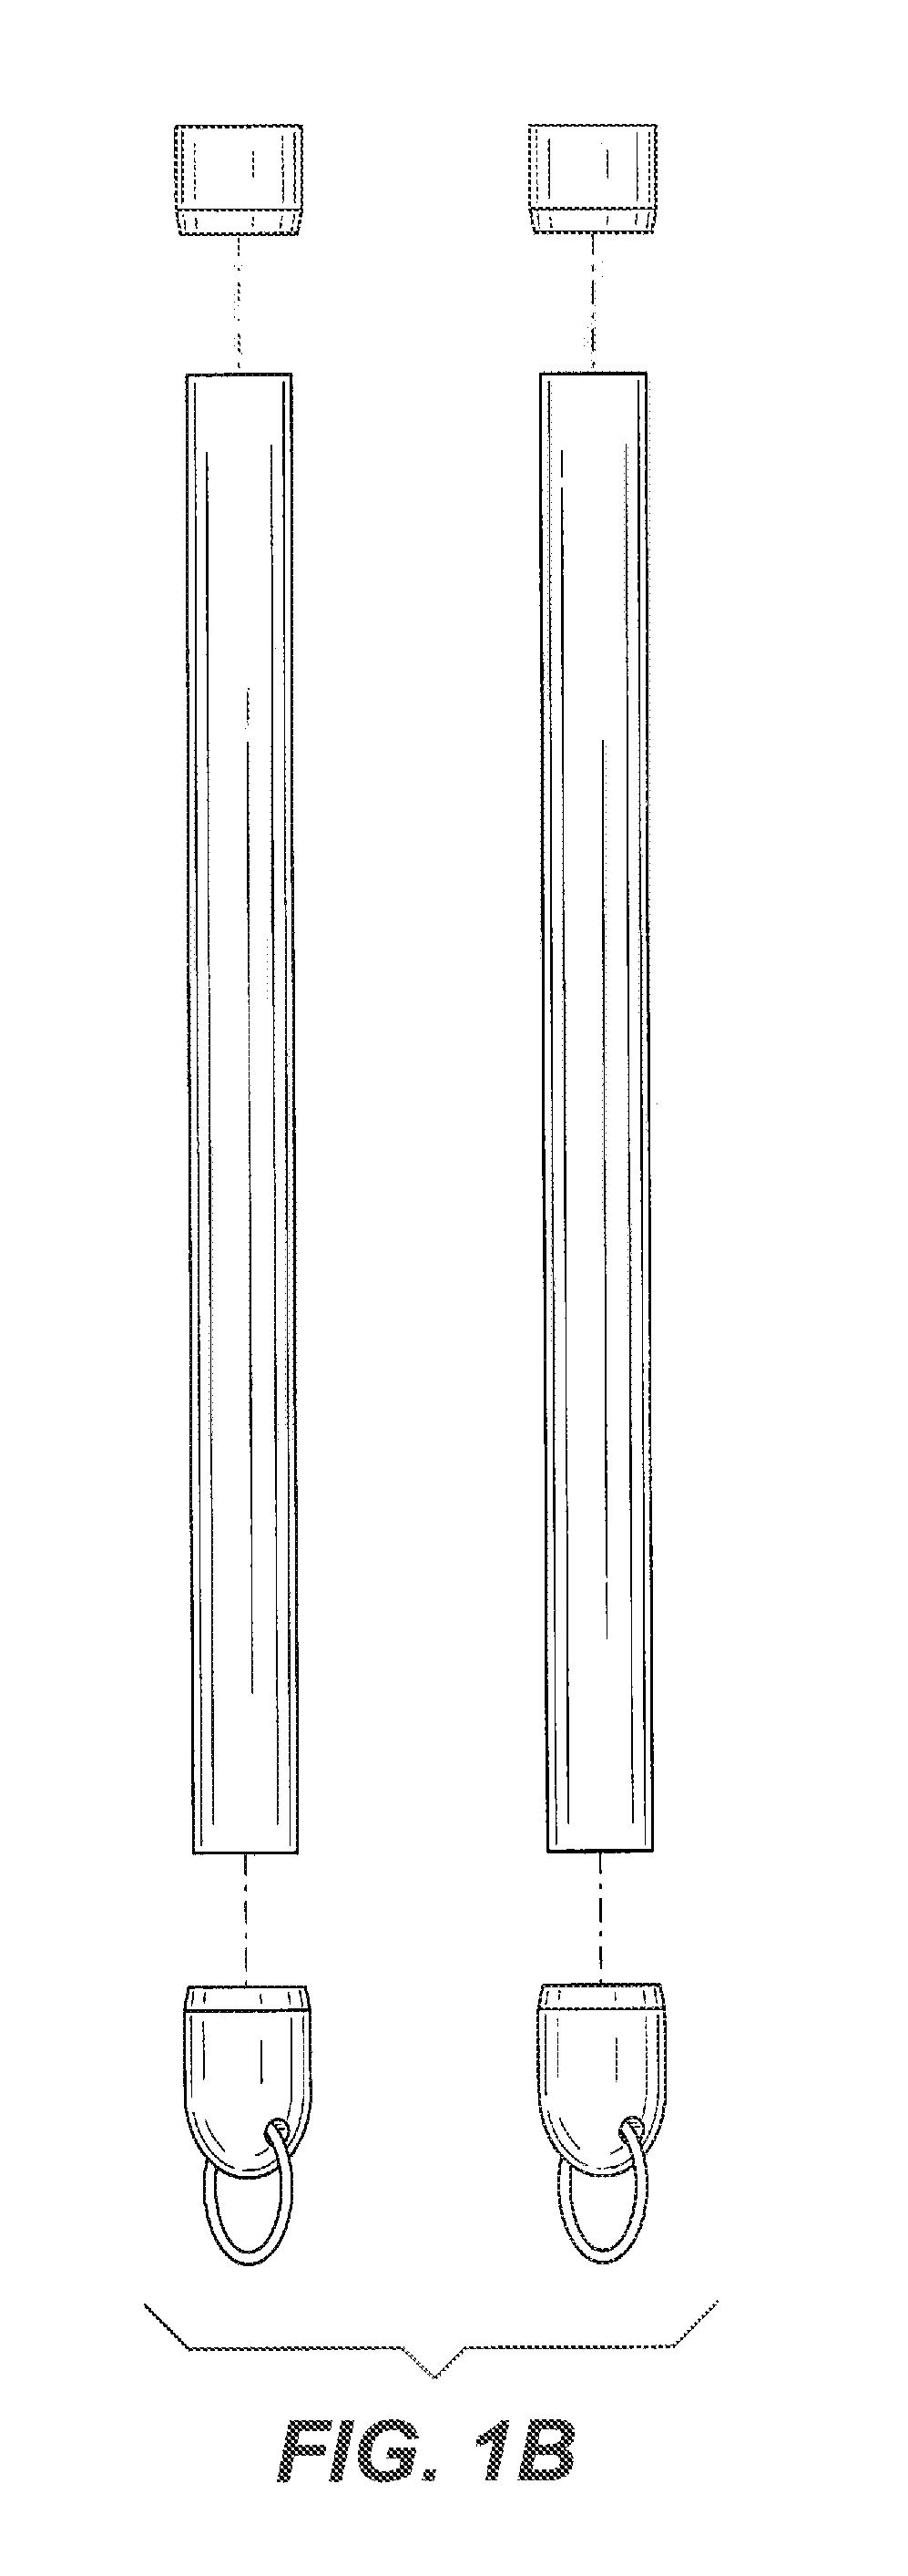 Method and Devices for Enhancing Speed, Stride, and Balance While Walking and/or Running